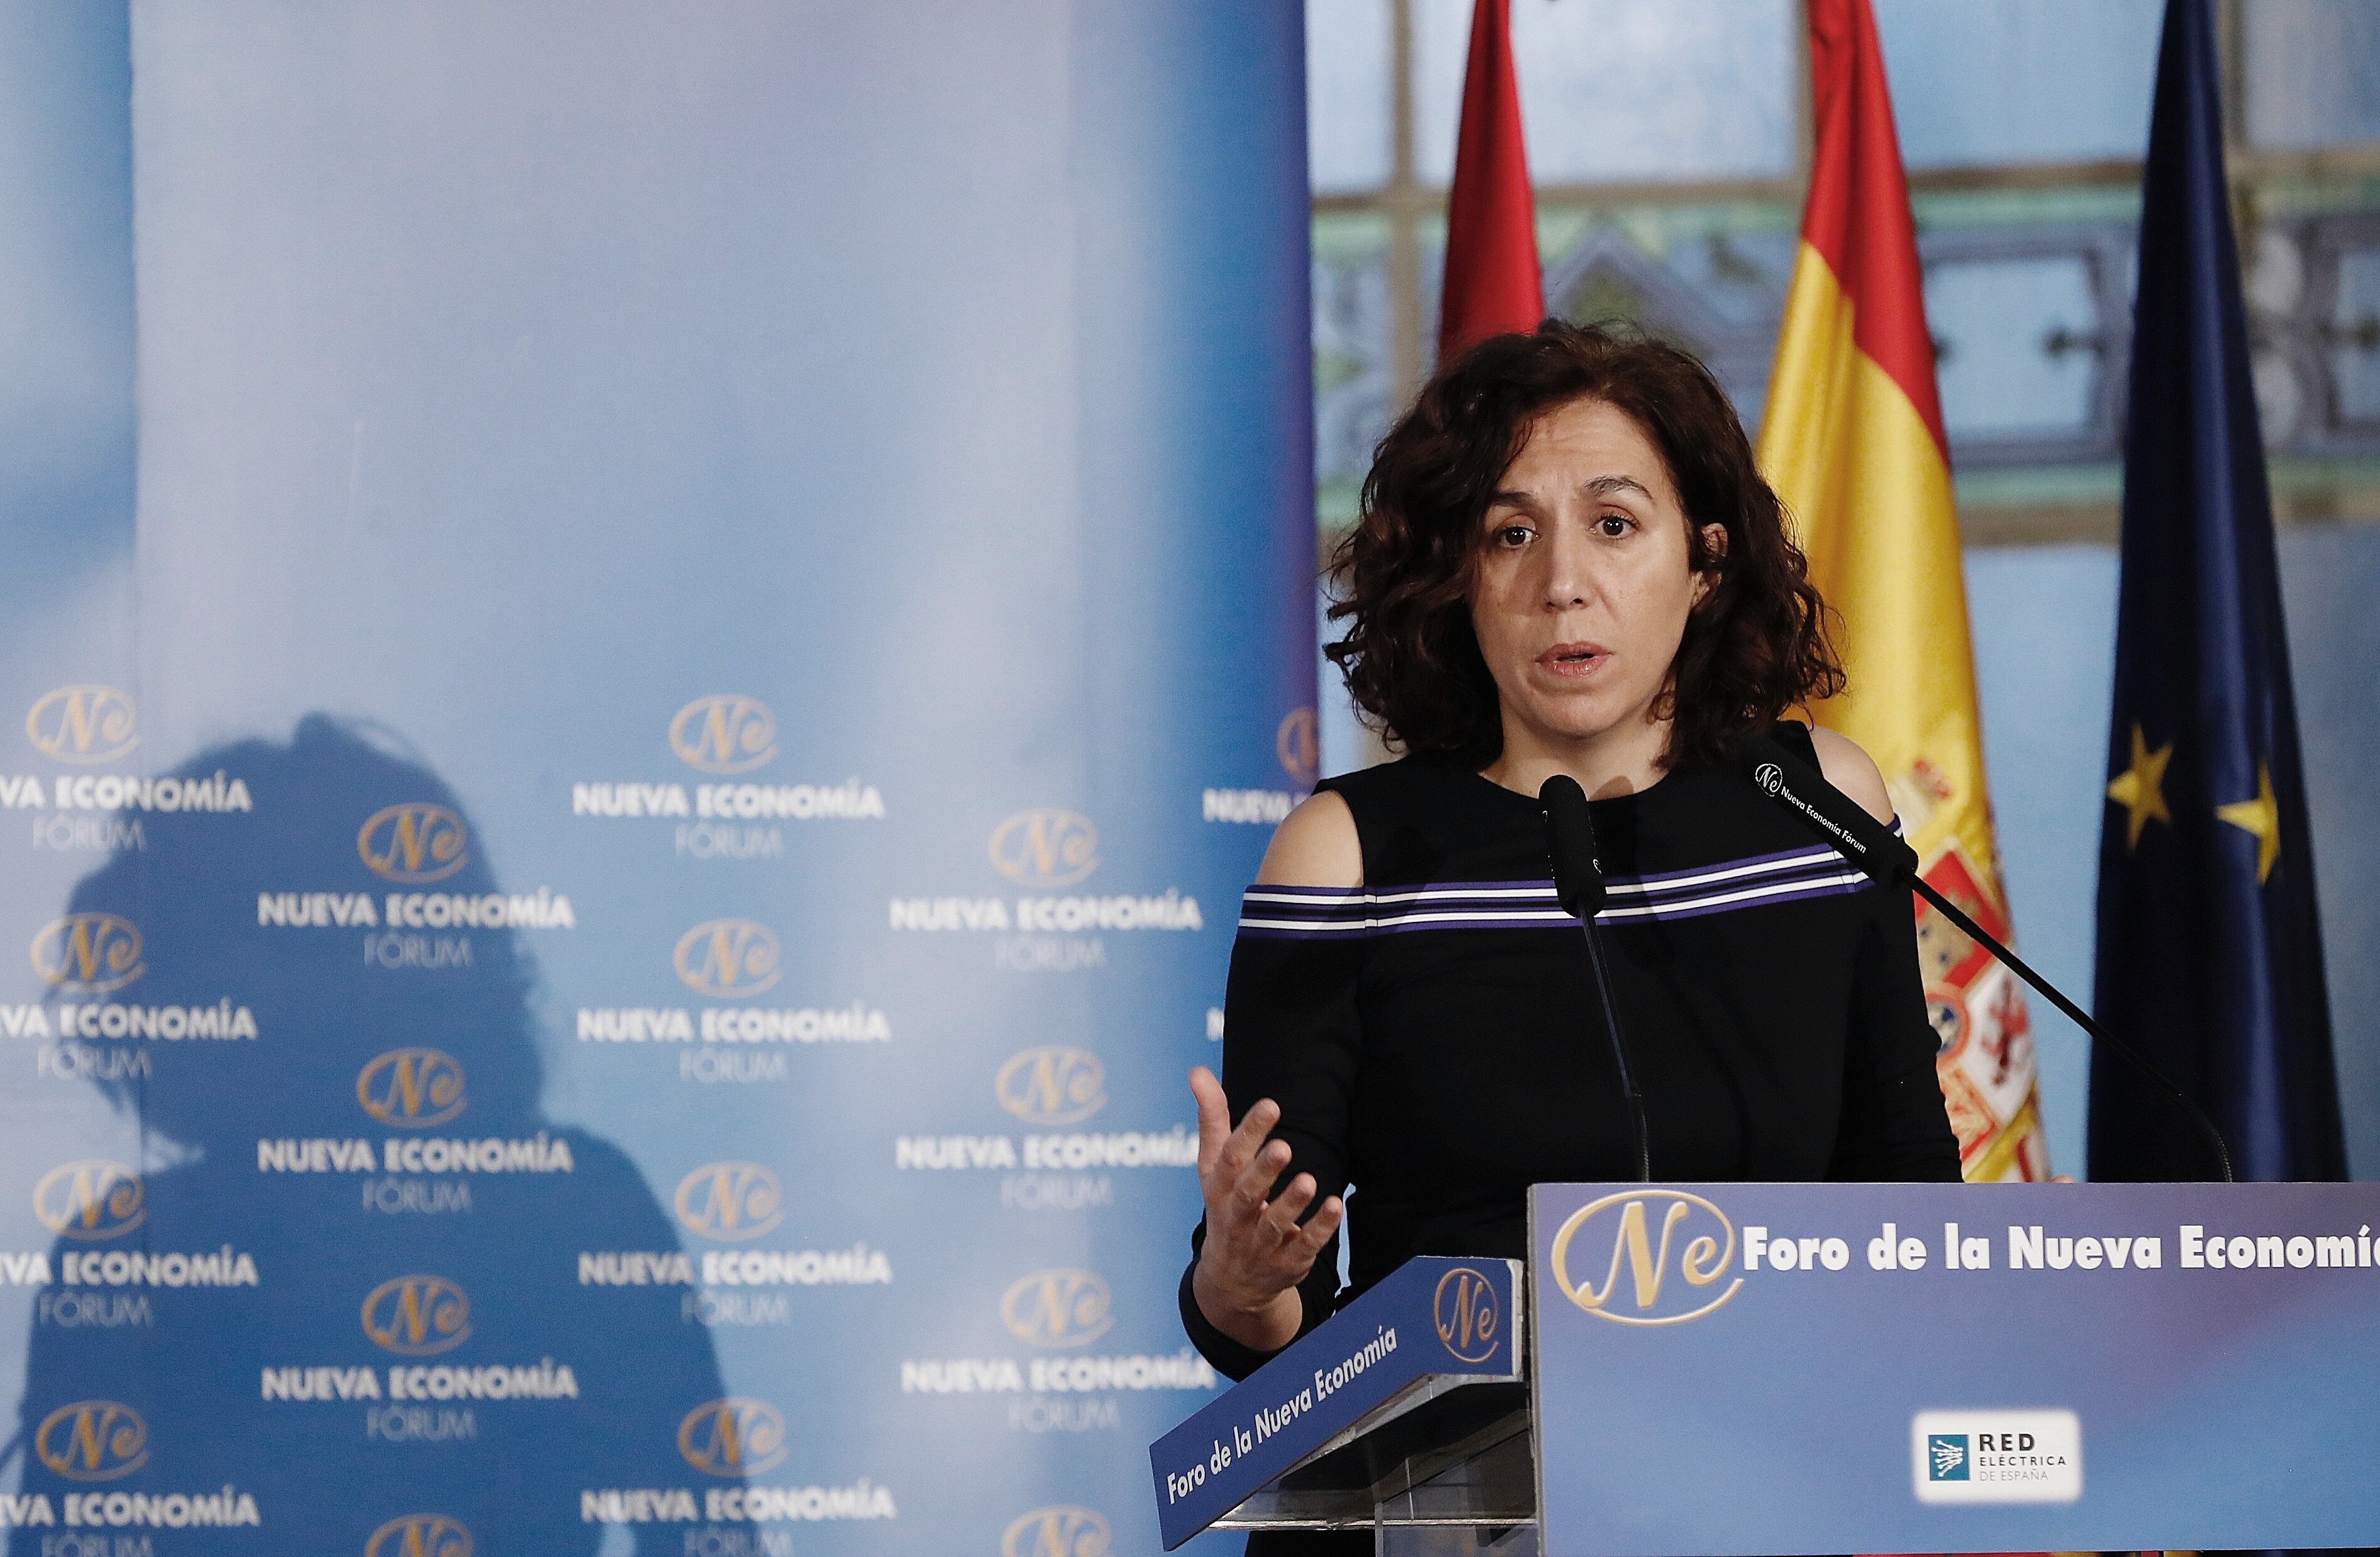 Head of Global Spain campaign compares Catalan referendum to rape